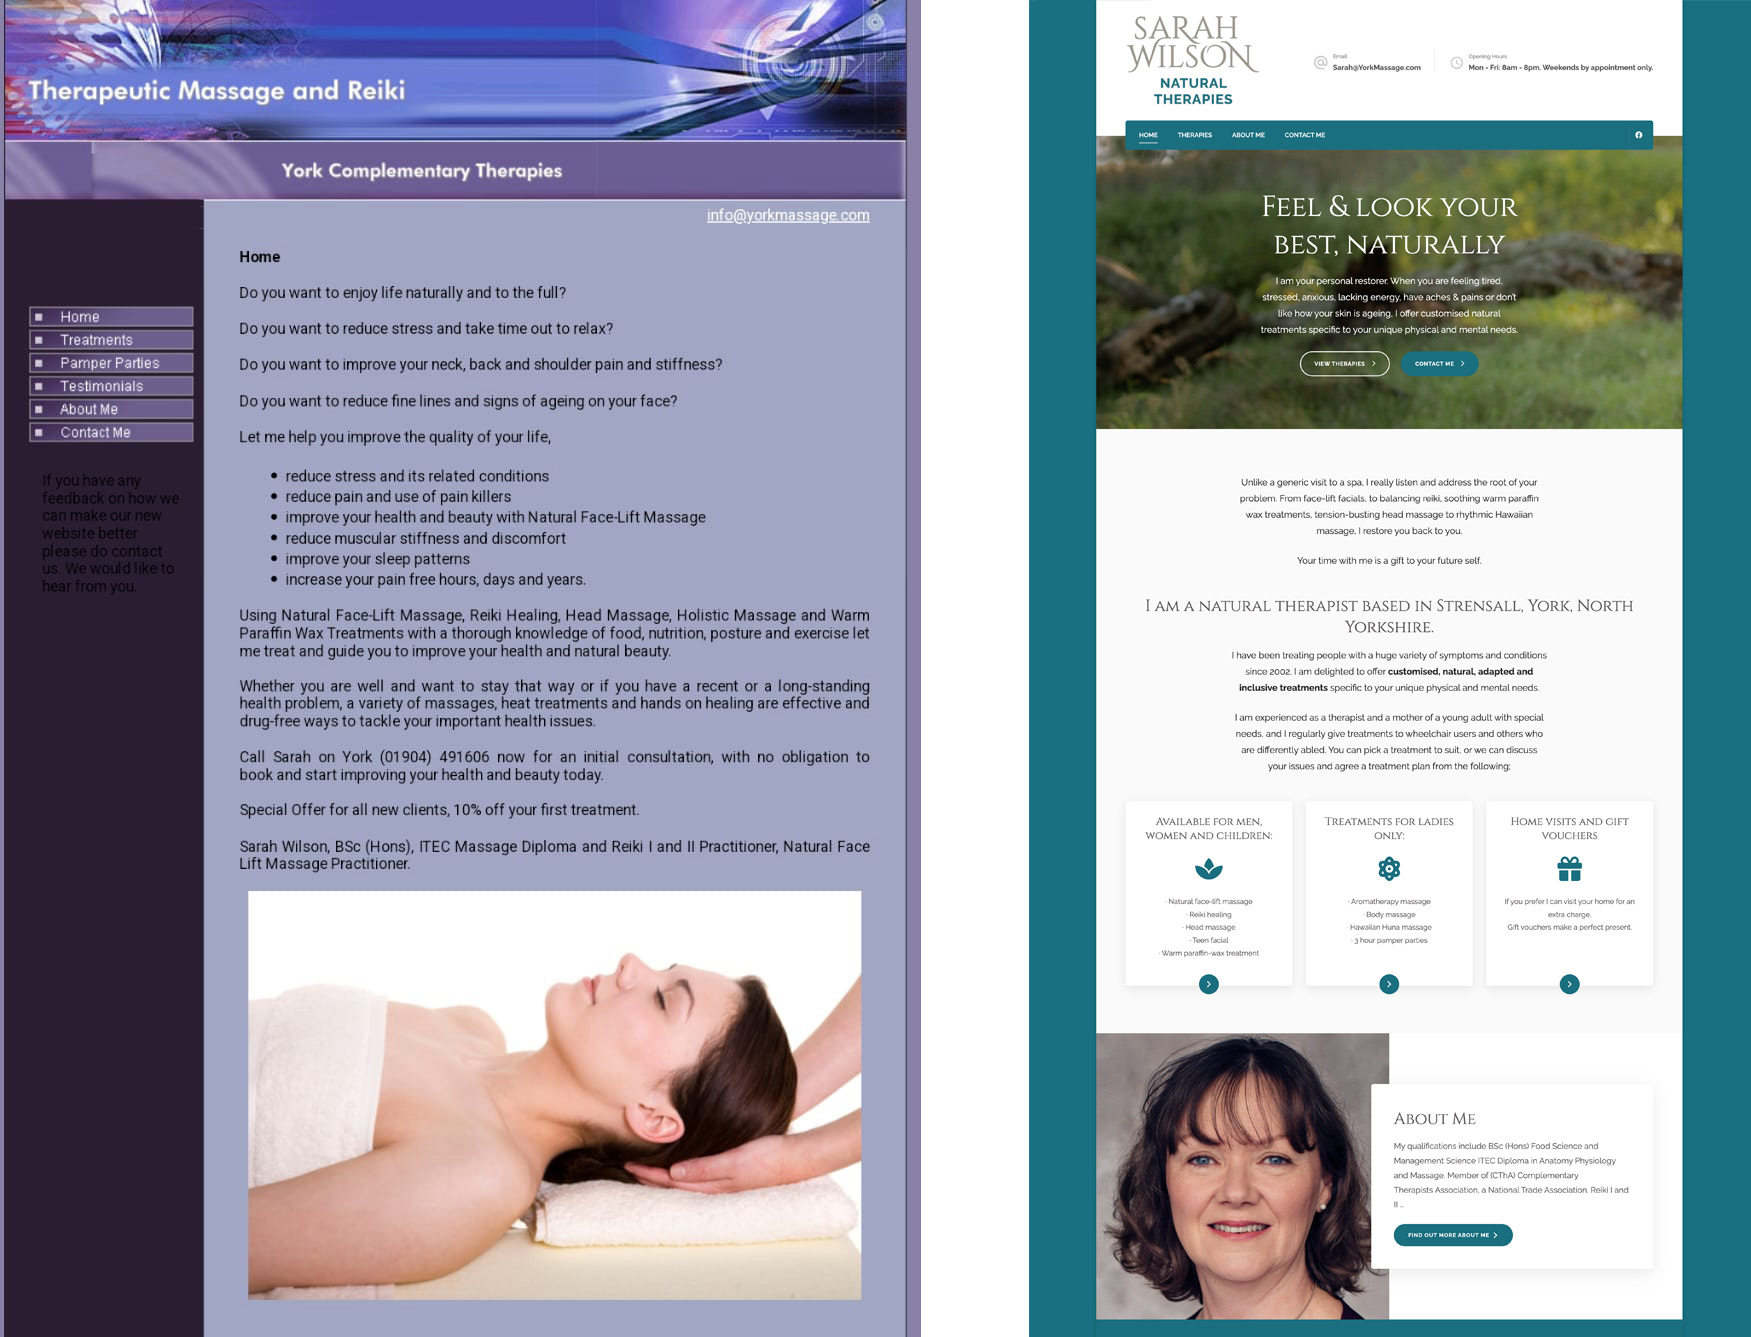 sarah wilson natural therapies york before and after website